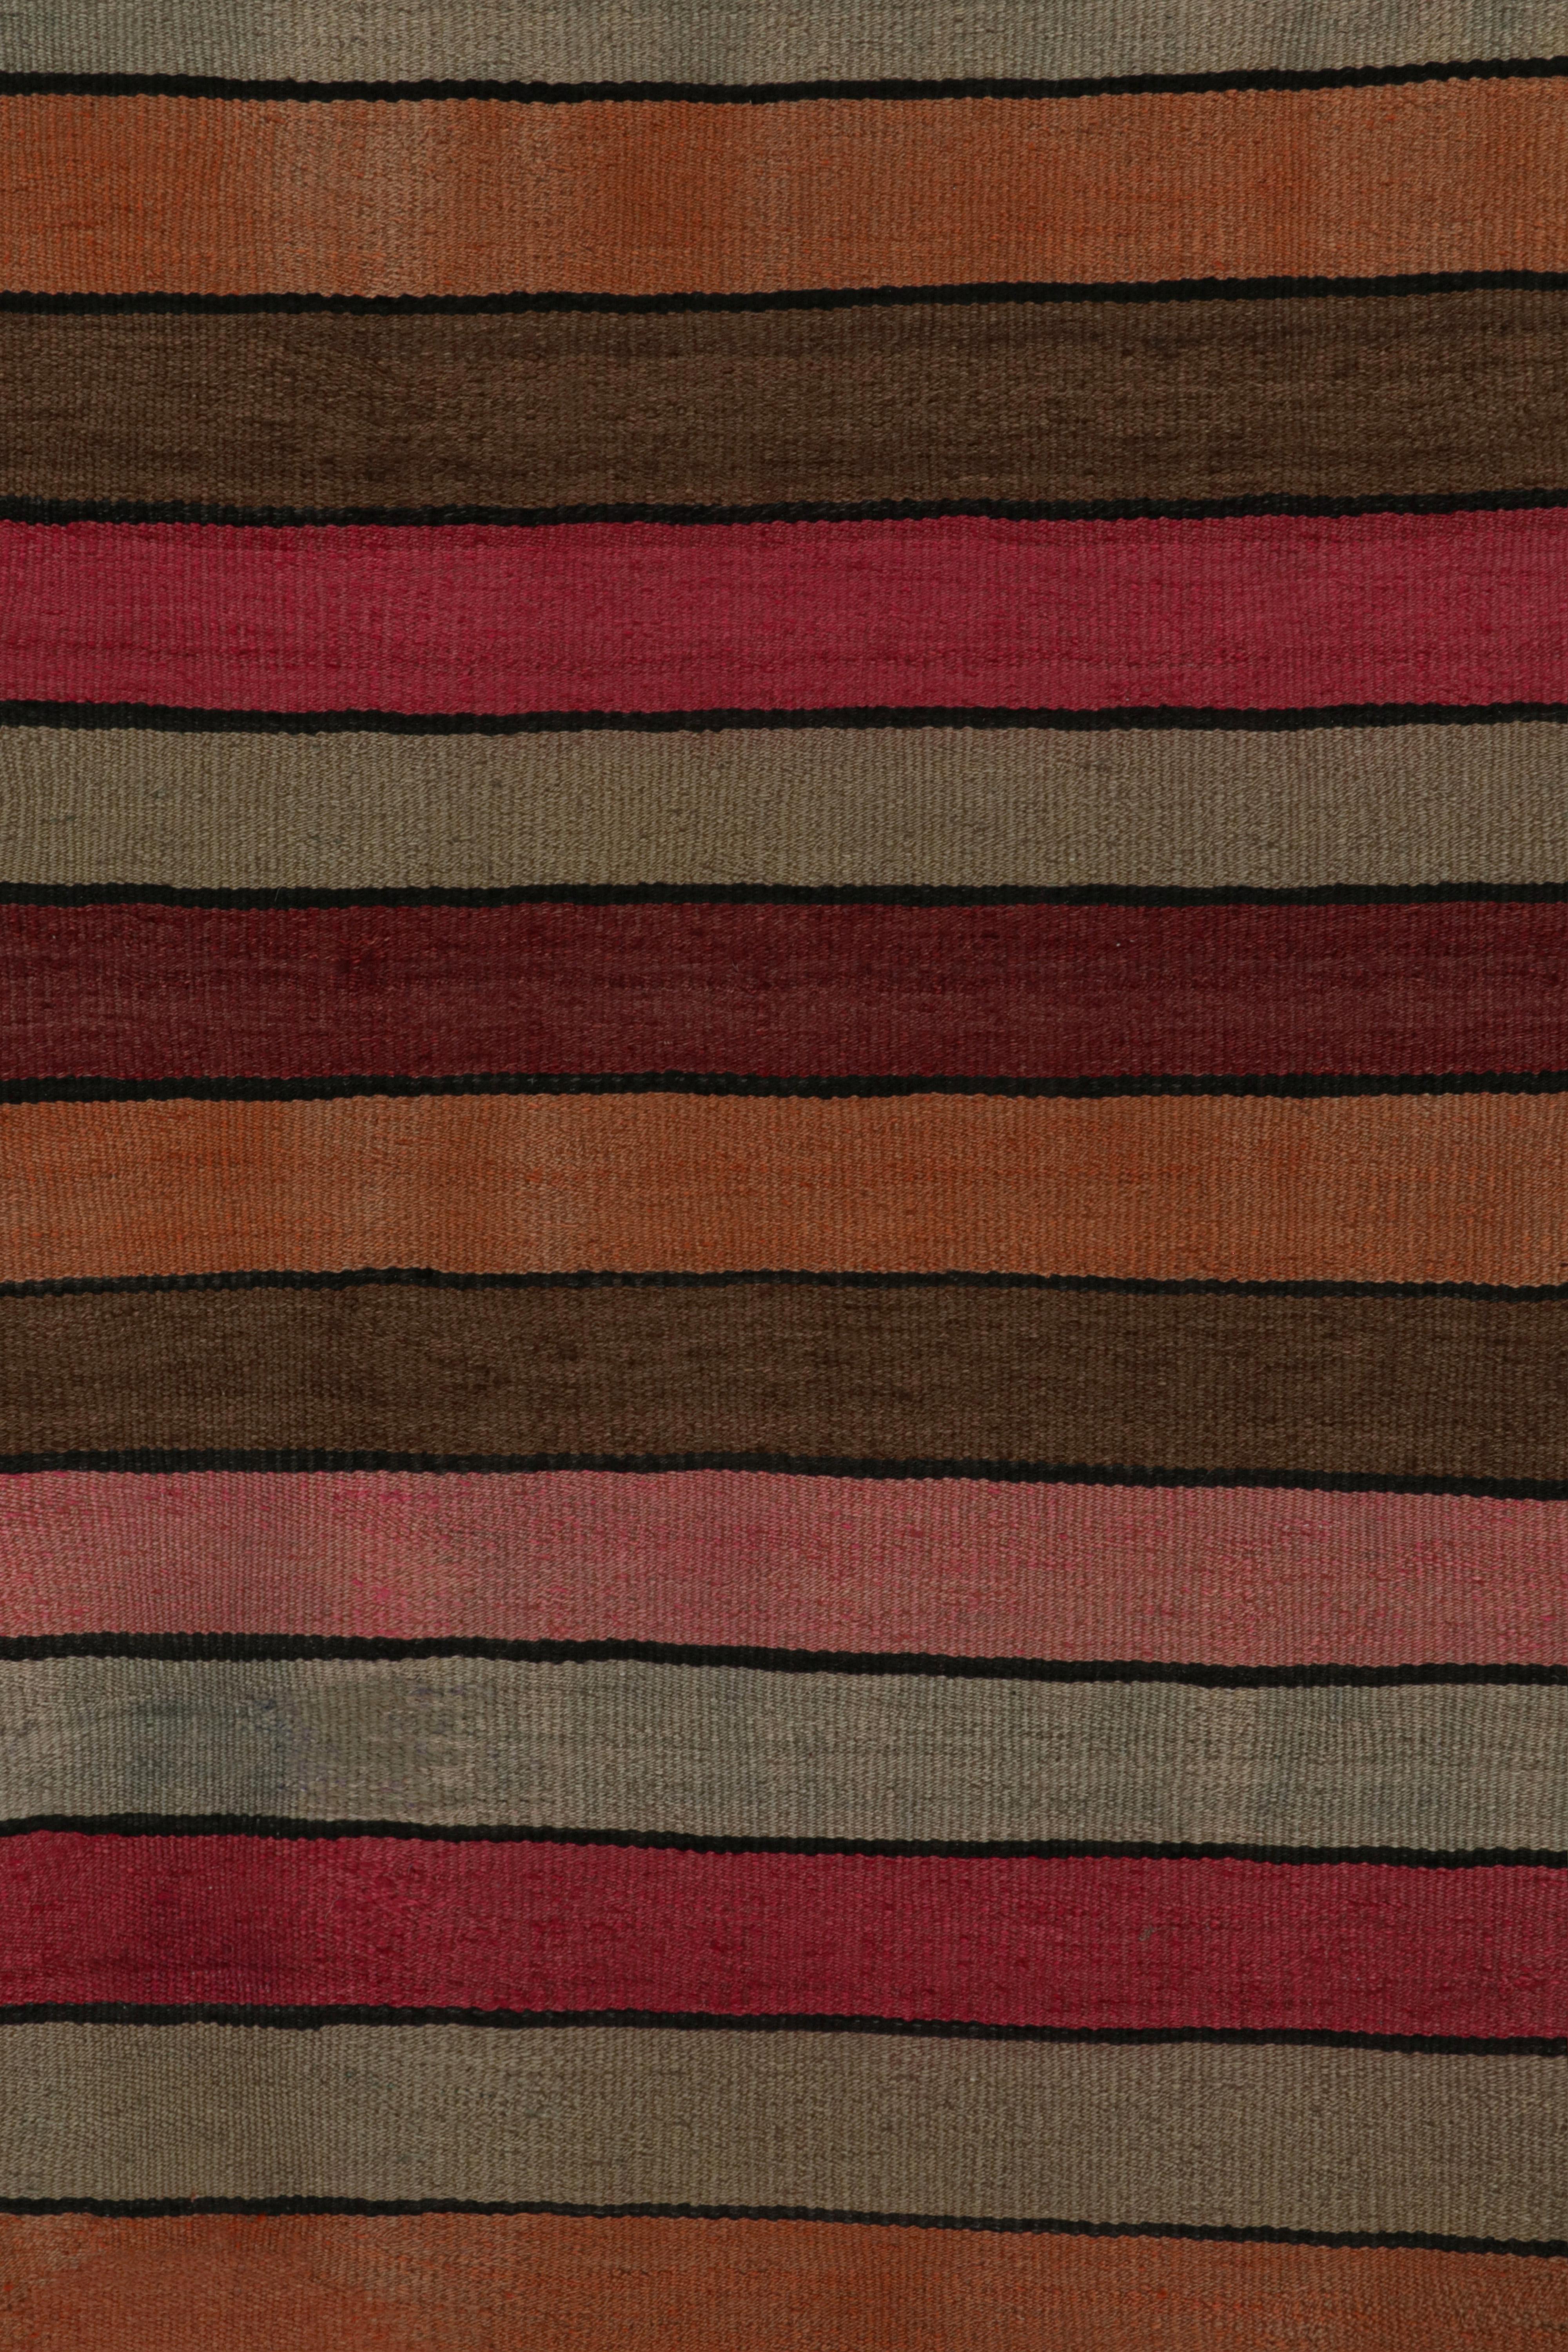 Mid-20th Century Vintage Persian tribal Kilim rug, with Stripes, from Rug & Kilim For Sale